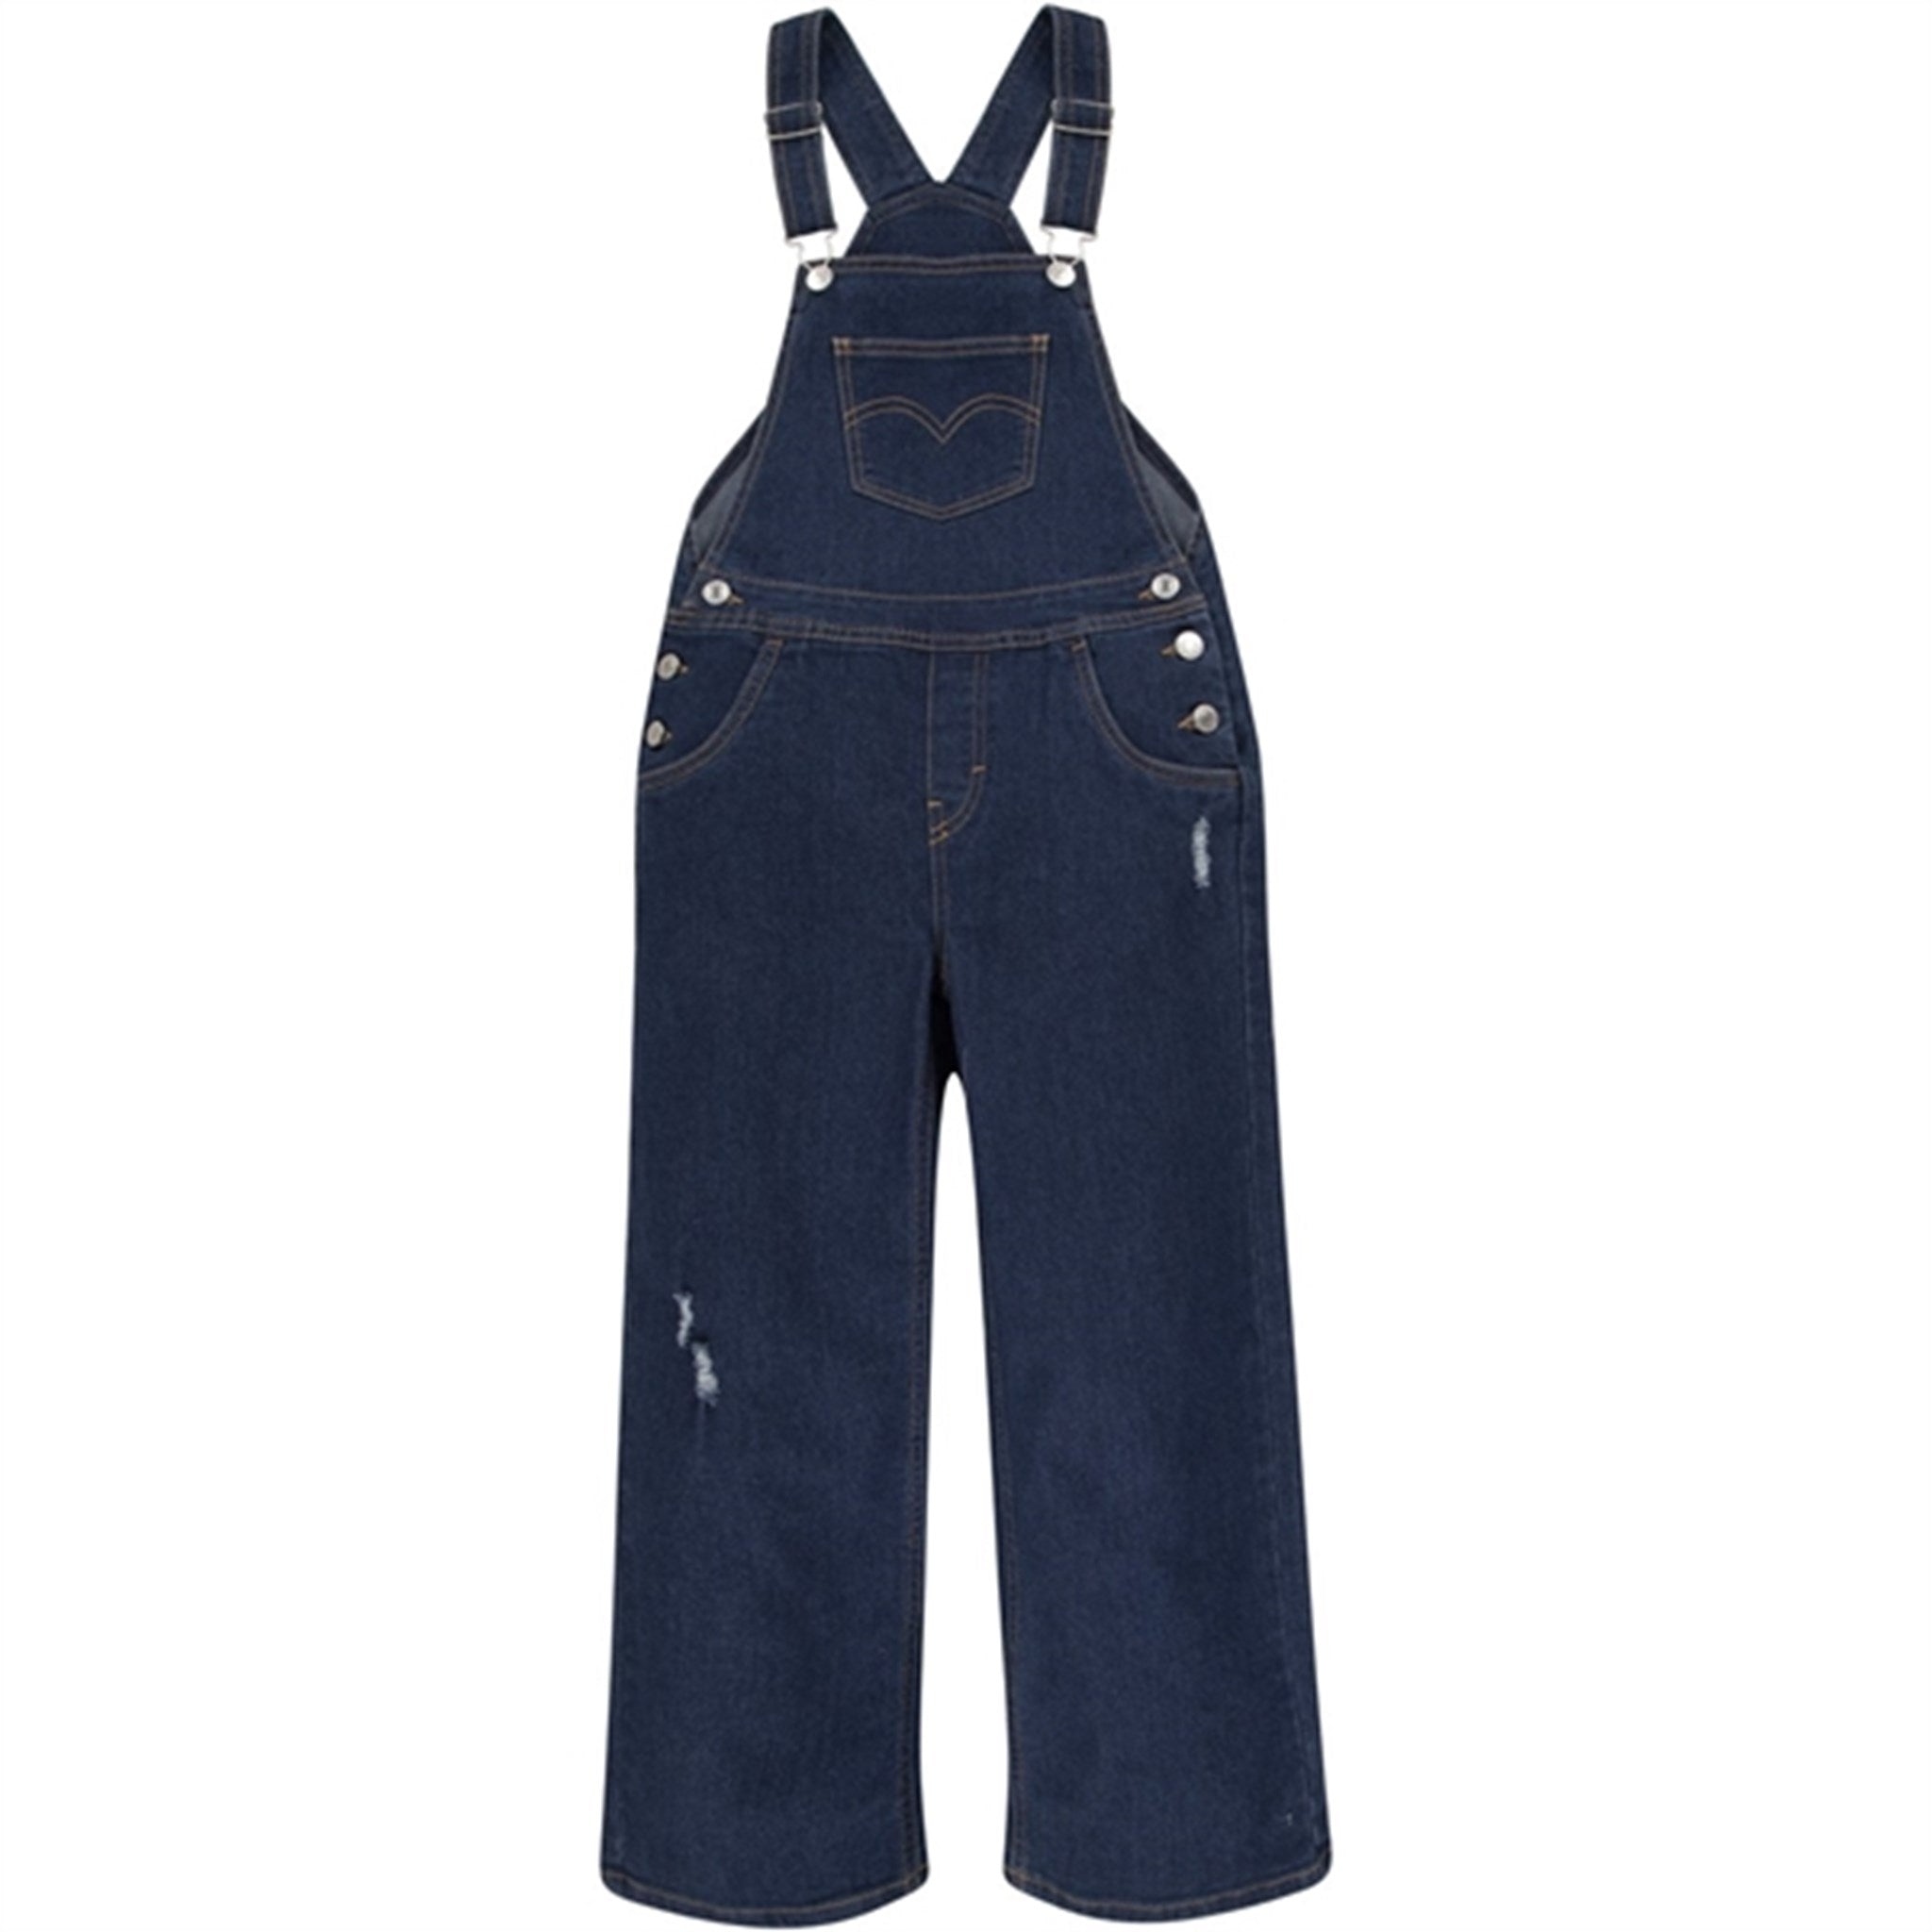 Levi's Baggy Denim Overalls Something Cheeky